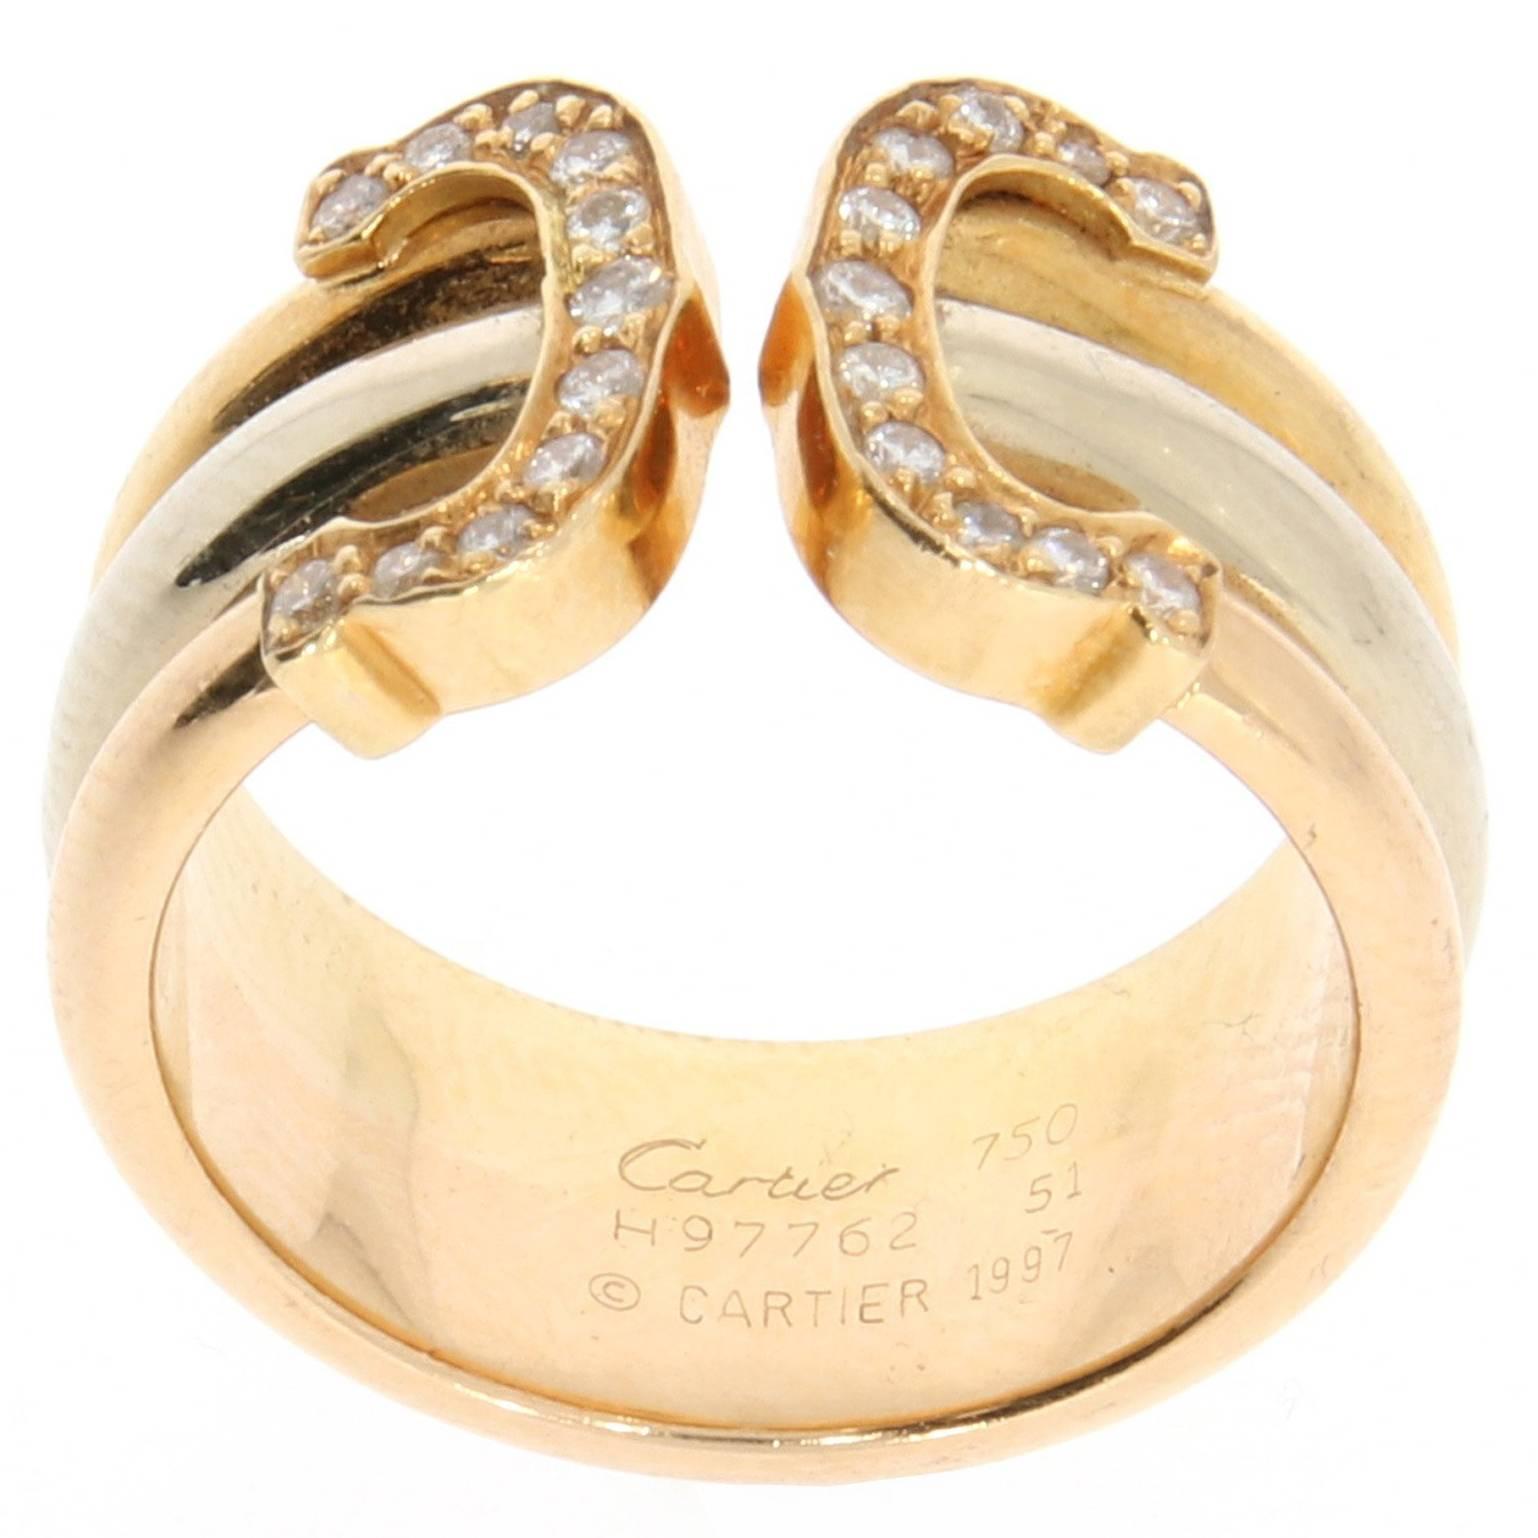 1997 Cartier Double C White Diamond Tricolor Yellow, Rose, White Gold Band Ring